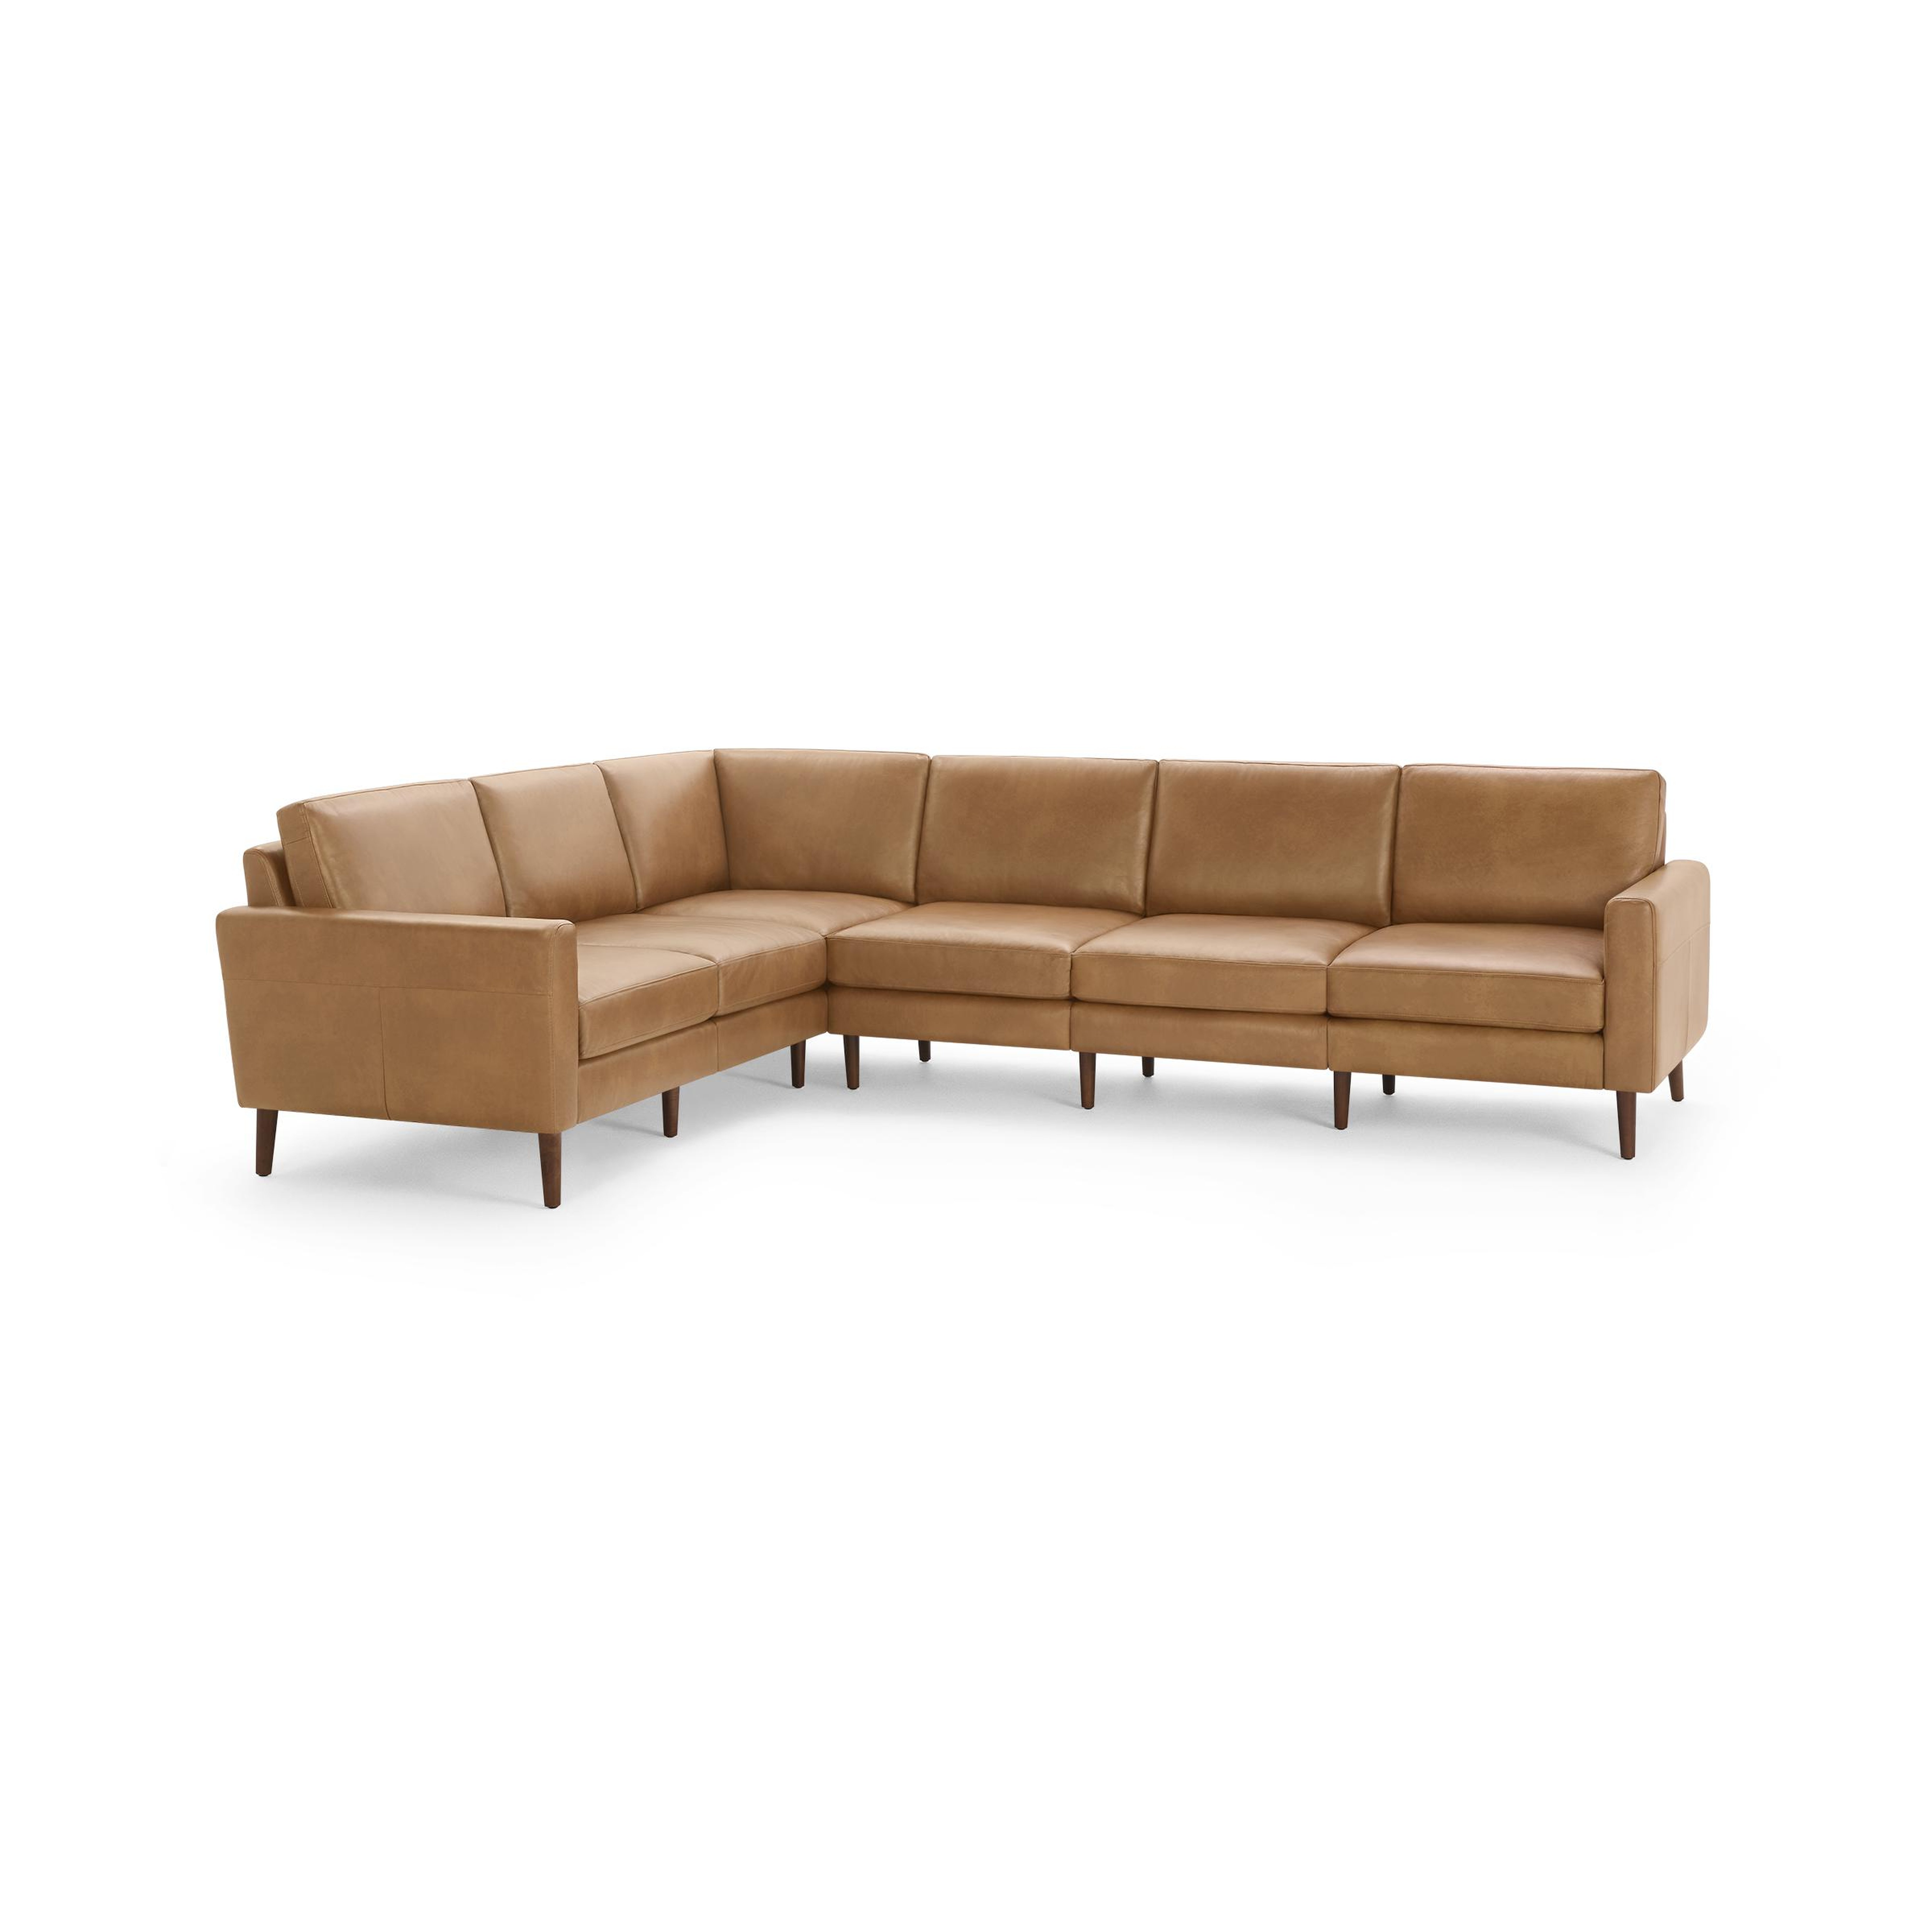 The Block Nomad Leather 6-Seat Corner Sectional in Camel, Walnut Legs - Burrow